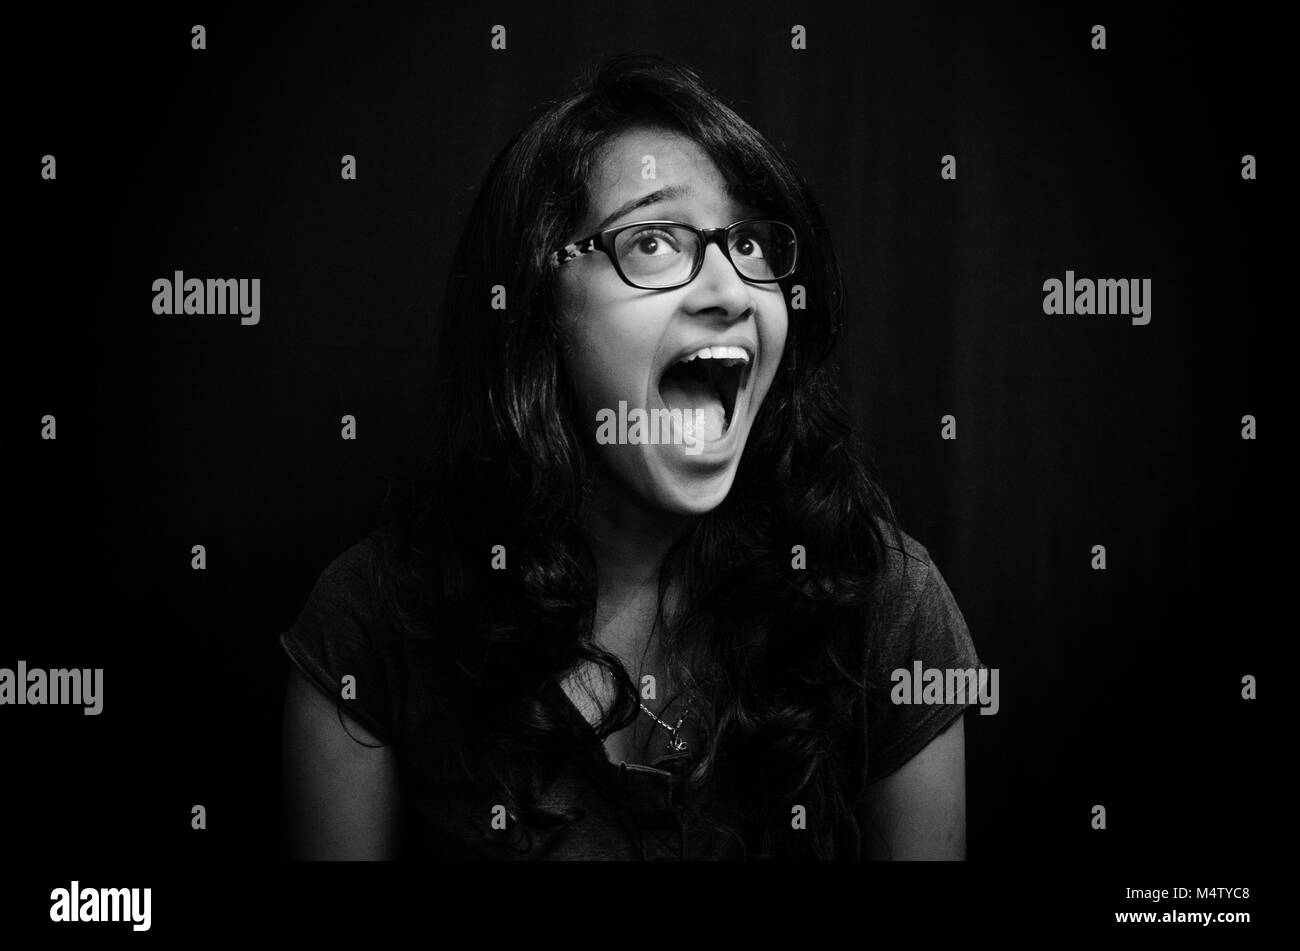 Black and white portrait of a young adult girl with eyeglasses, screaming out of joy, uncontrolled burst of emotion over black background. Stock Photo